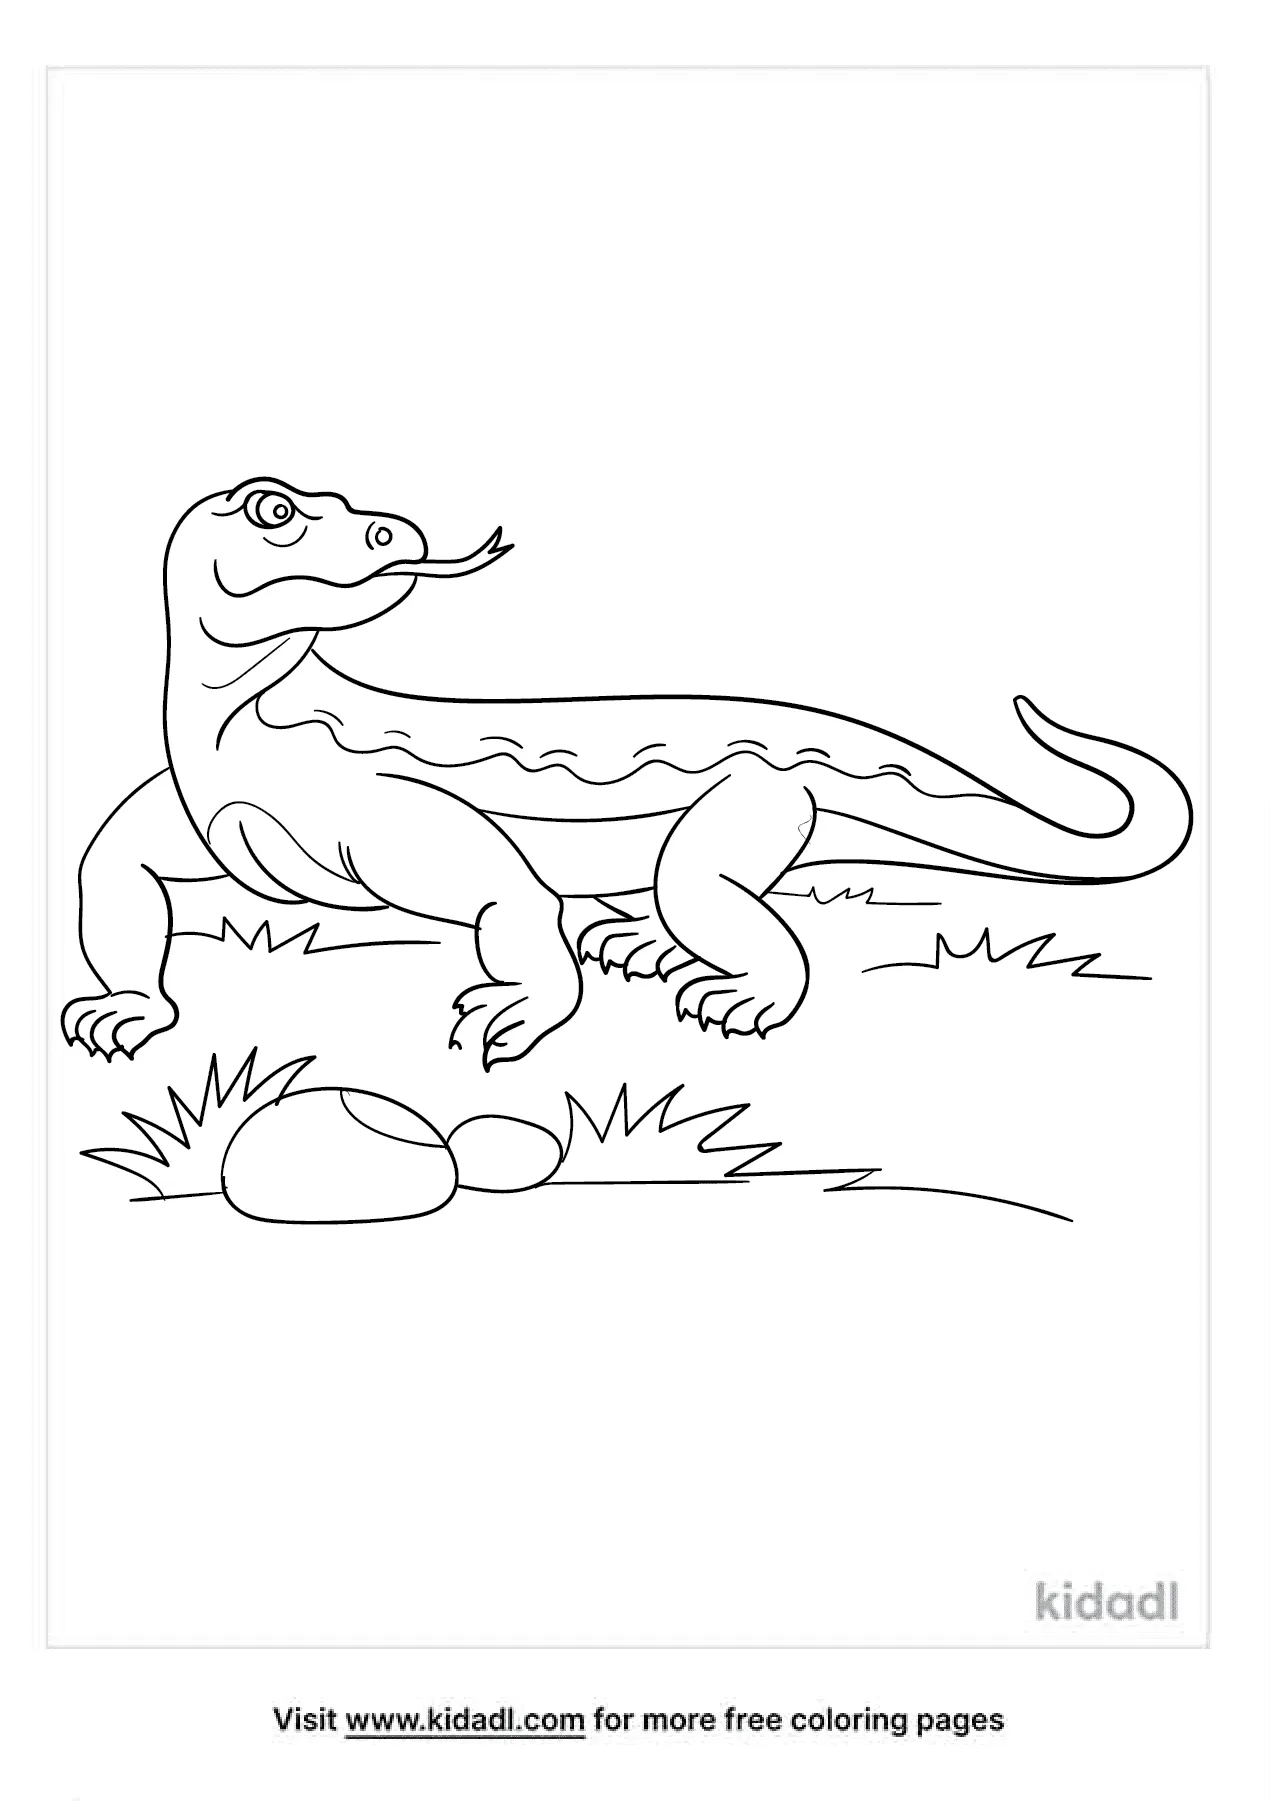 komodo dragon coloring pages free animals coloring pages kidadl